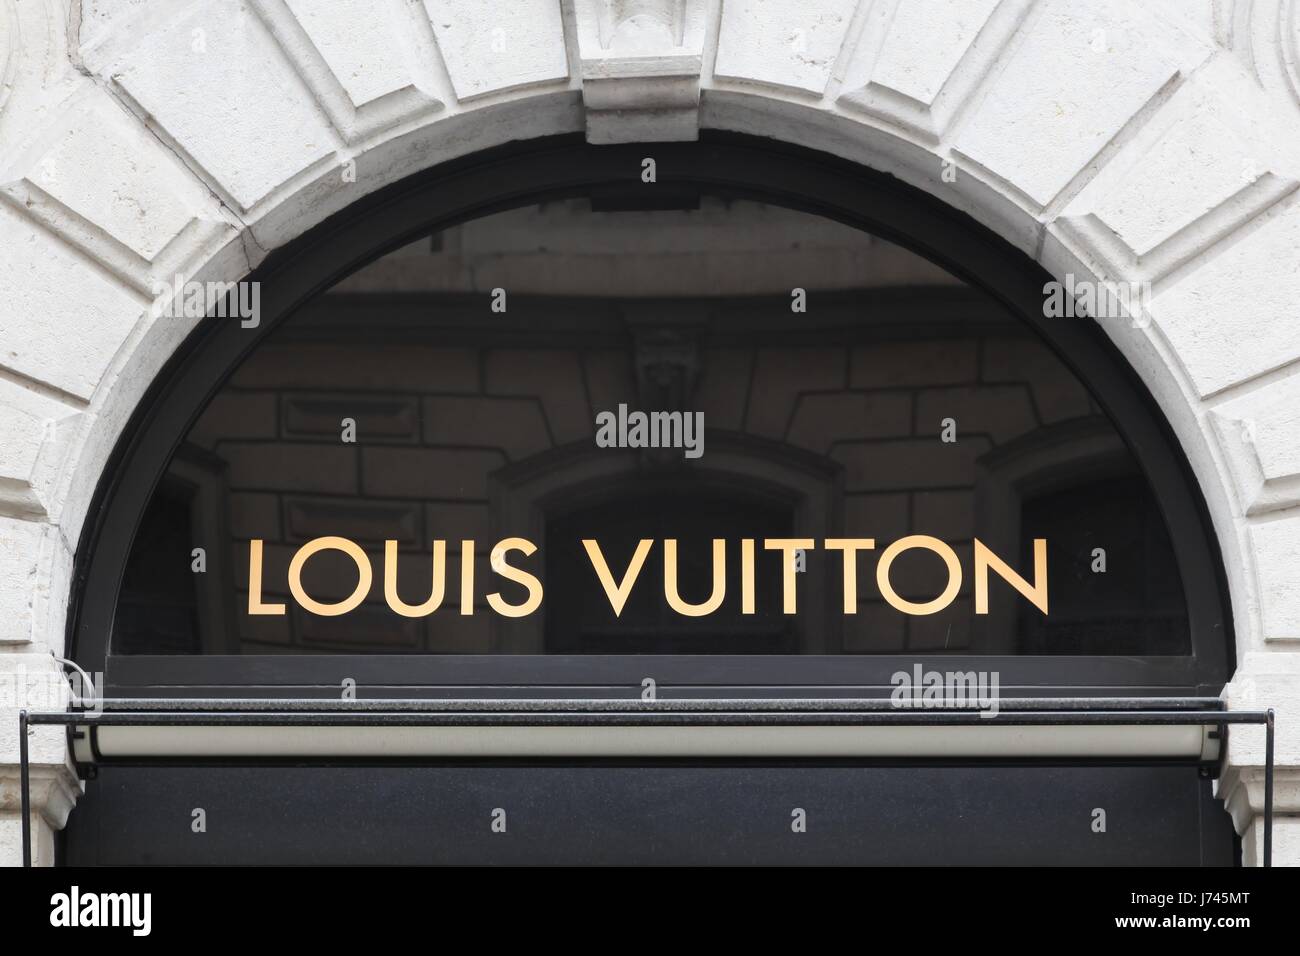 157 Lvmh Group Images, Stock Photos & Vectors